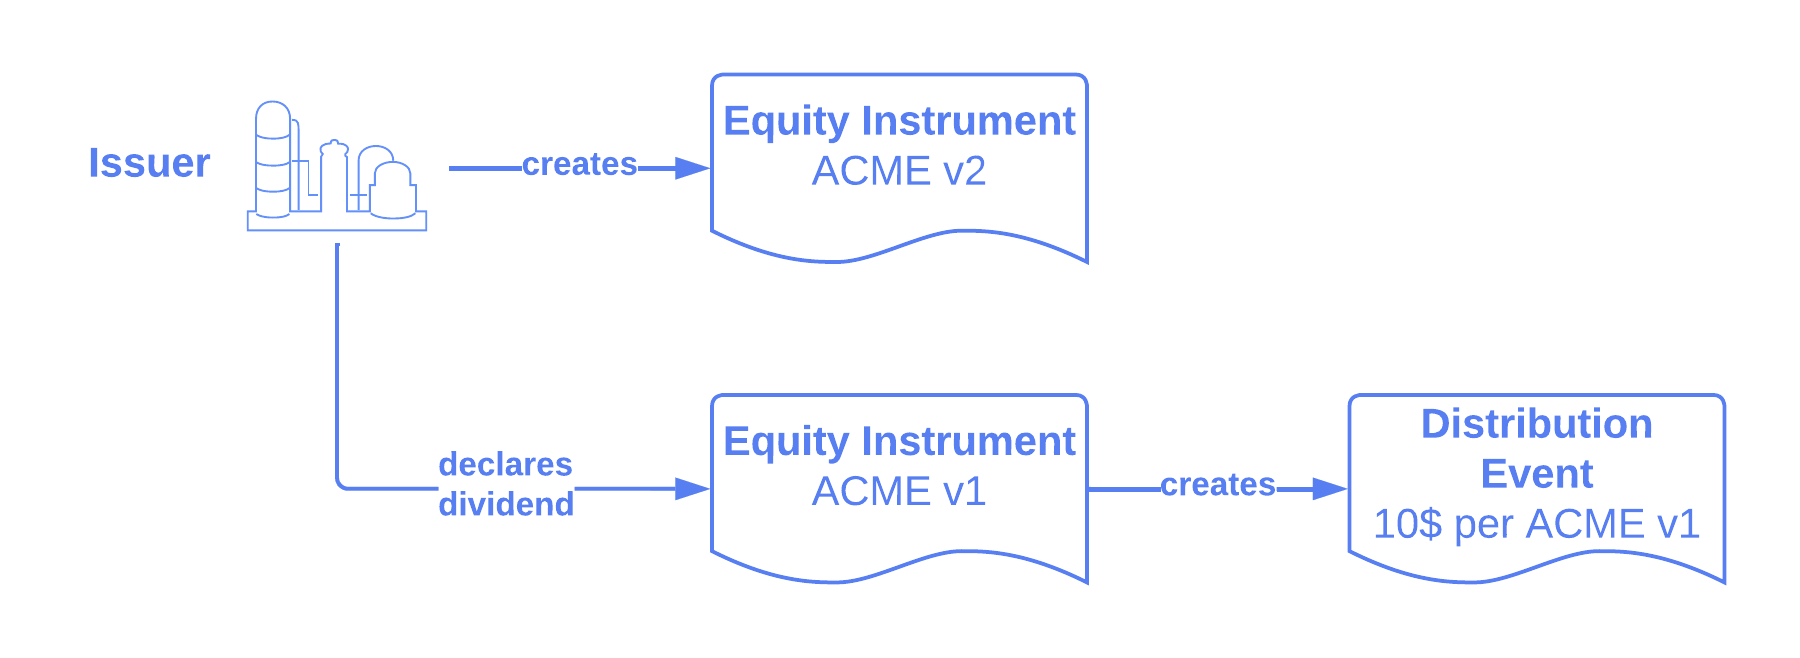 The issuer creates a new ACME v2 instrument. They also create a distribution event by declaring a dividend on the ACME v1 instrument.